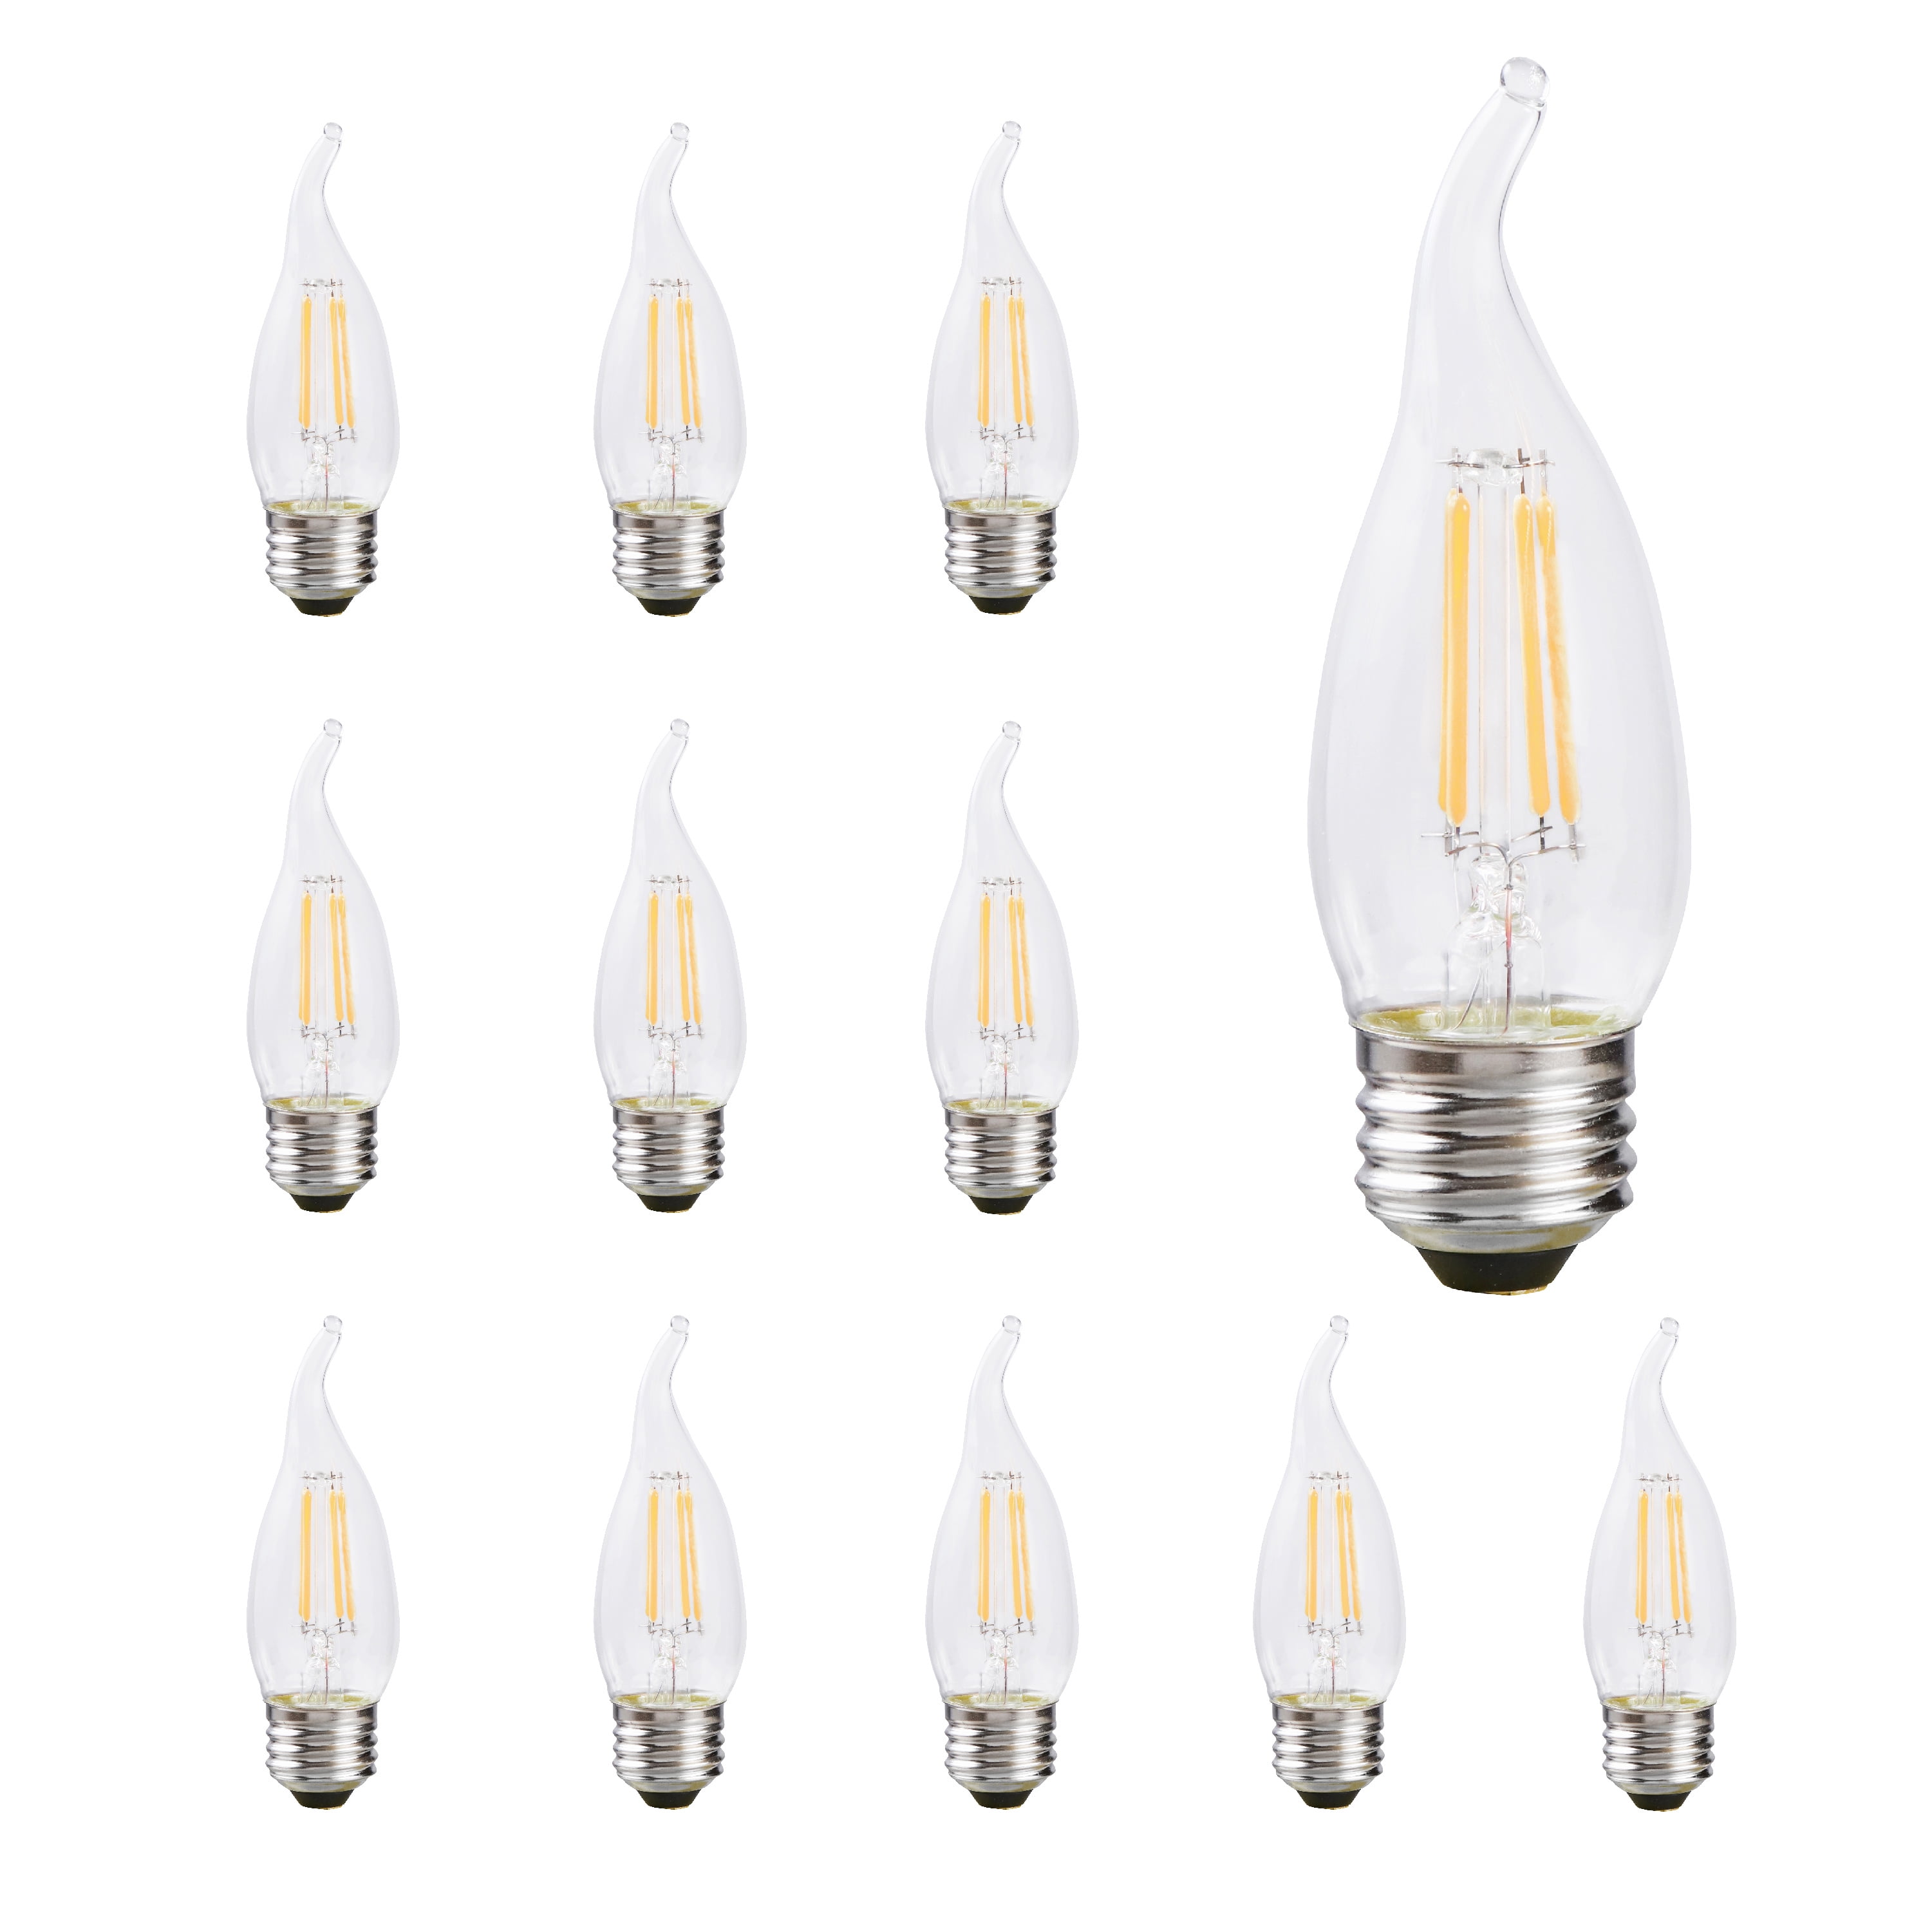 Replacement for Sylvania 50mr16/sp/10/c Light Bulb by Technical Precision 2 Pack 